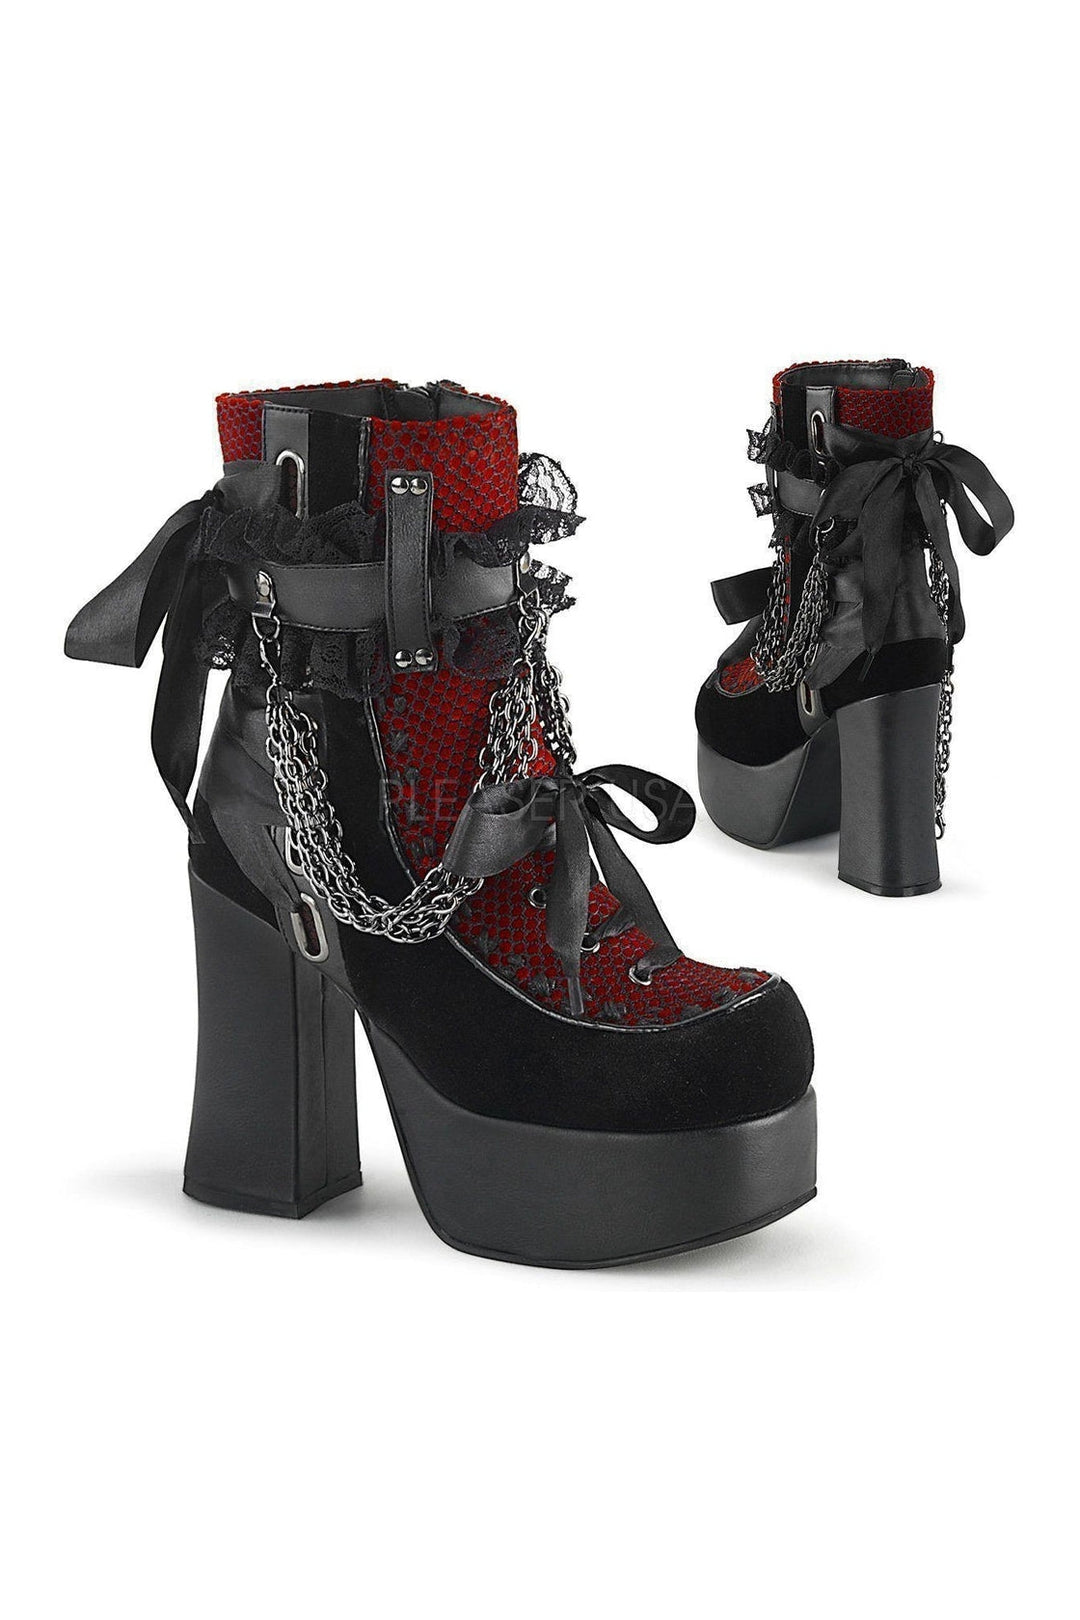 CHARADE-110 Demonia Ankle Boots | Black Faux Leather-Demonia-SEXYSHOES.COM